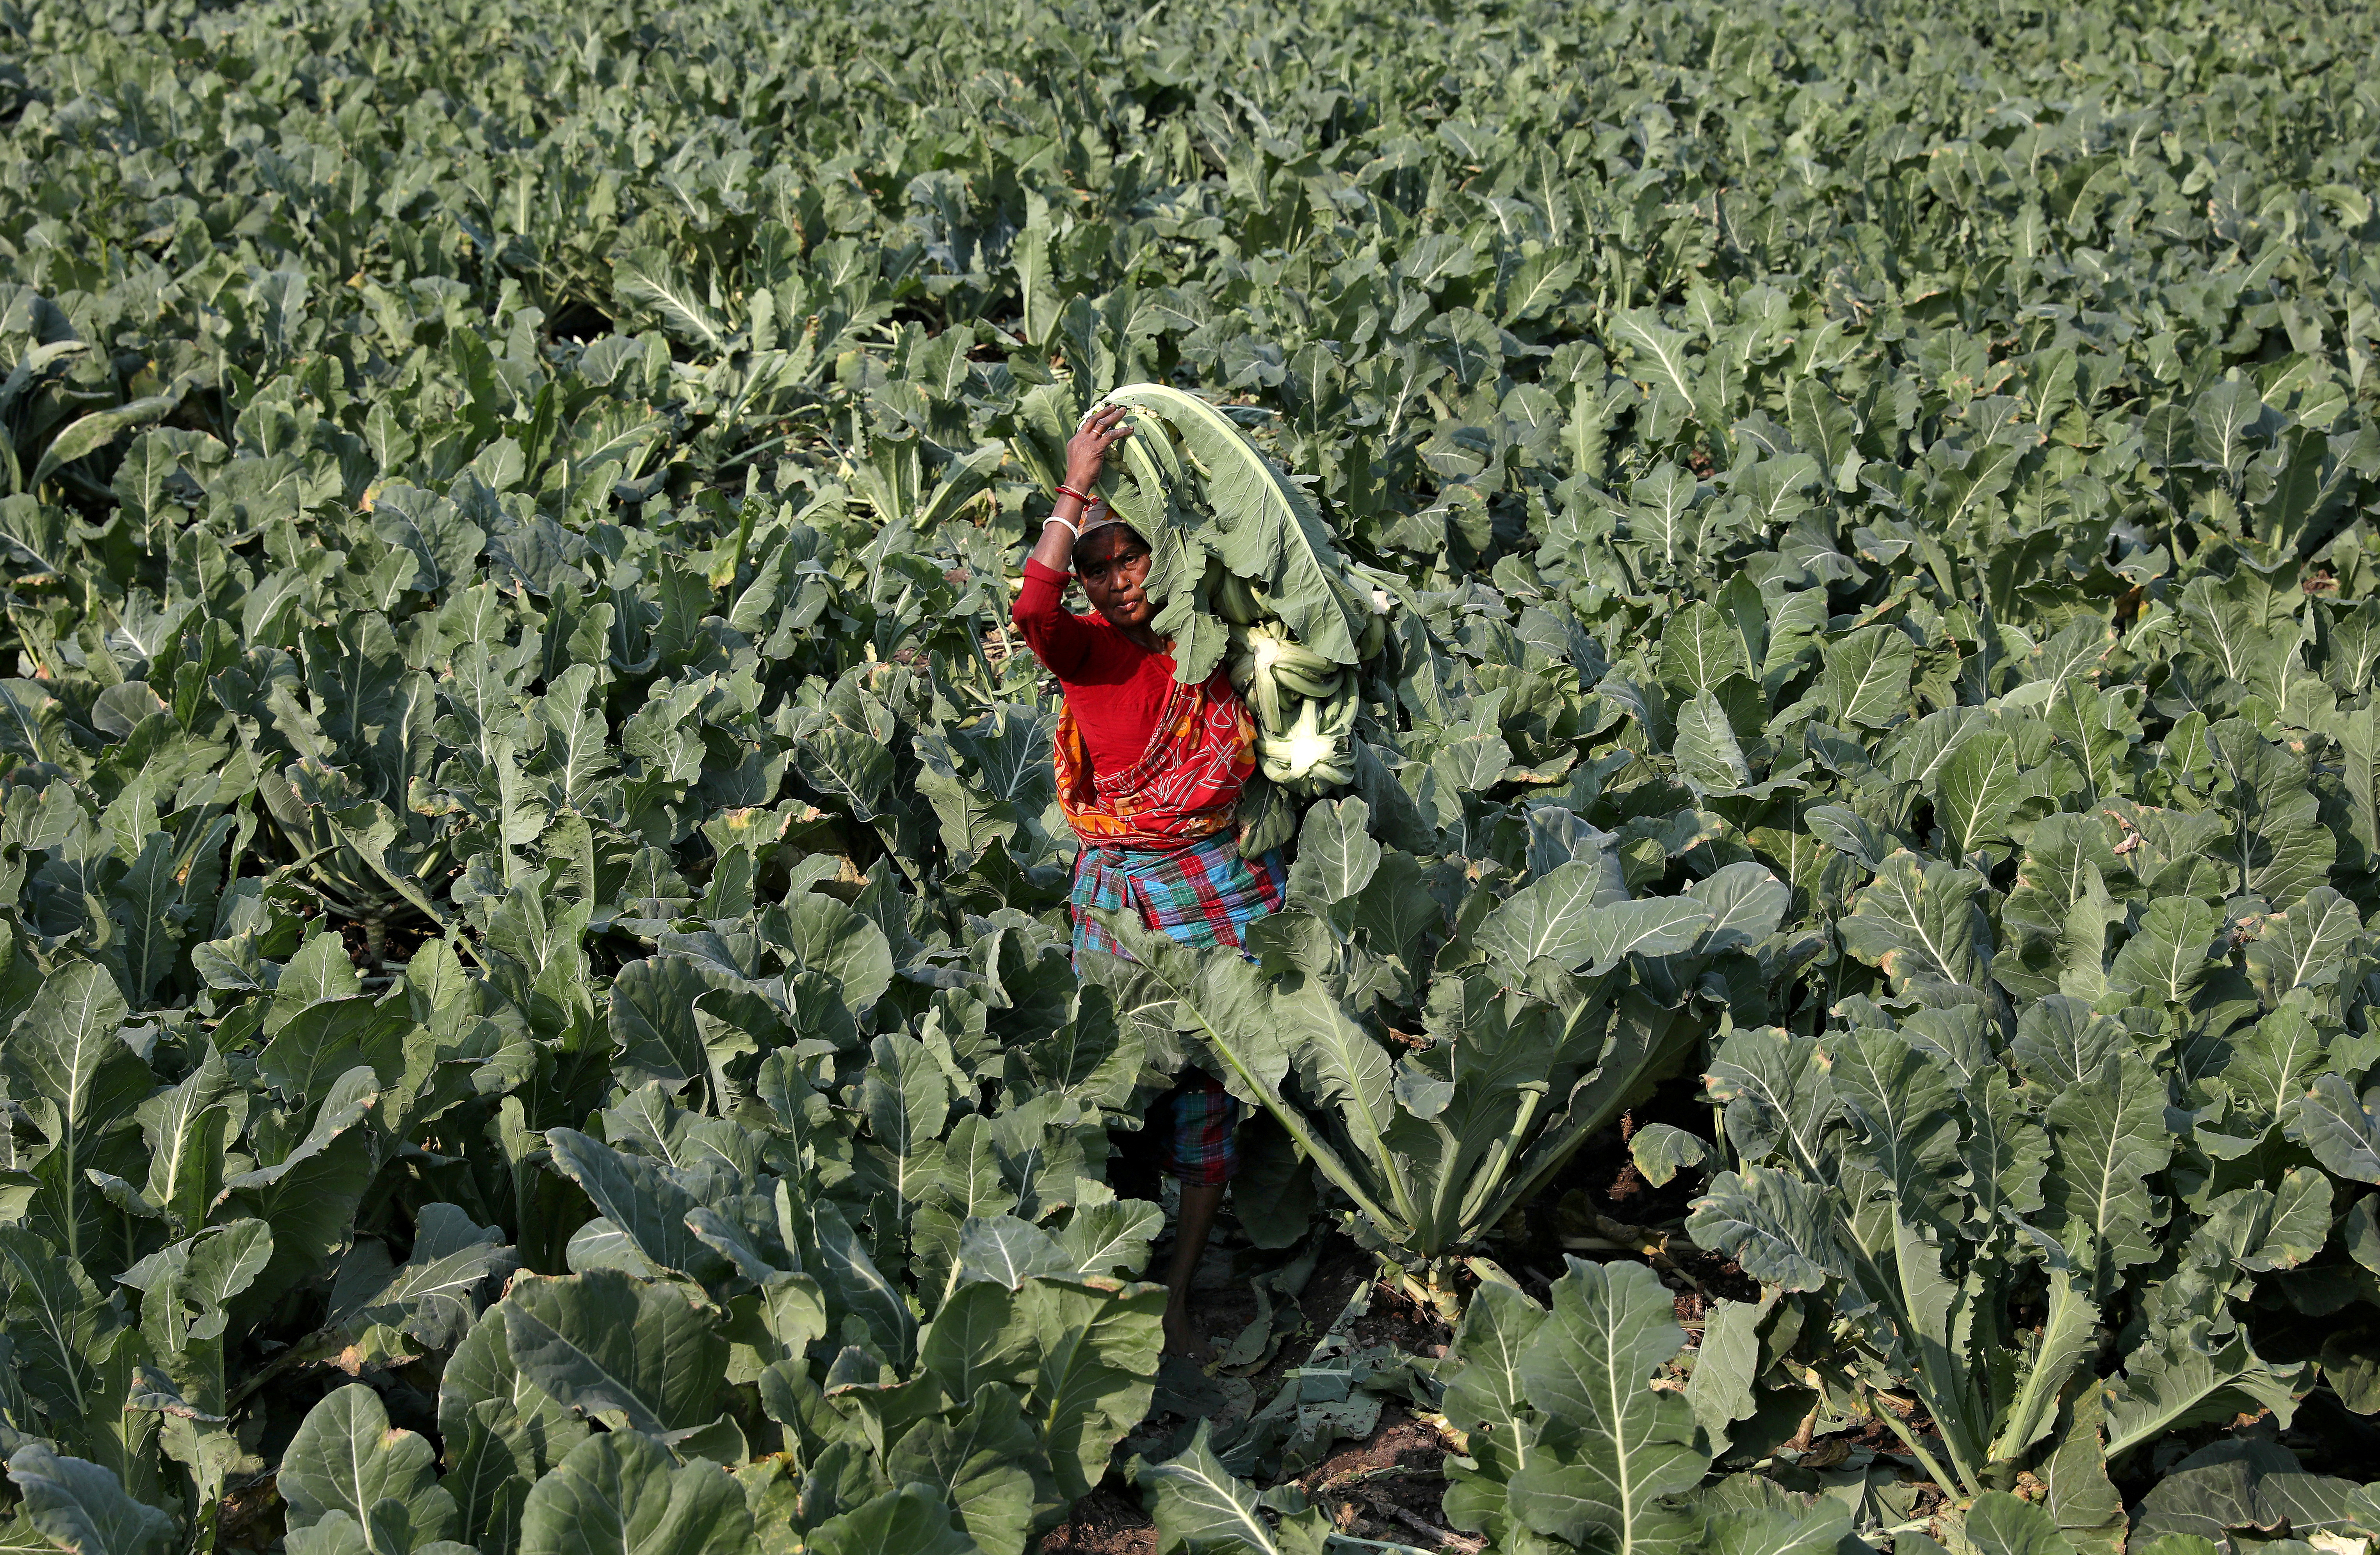 A farmer carries harvested cauliflower for sale at her field in Kolkata